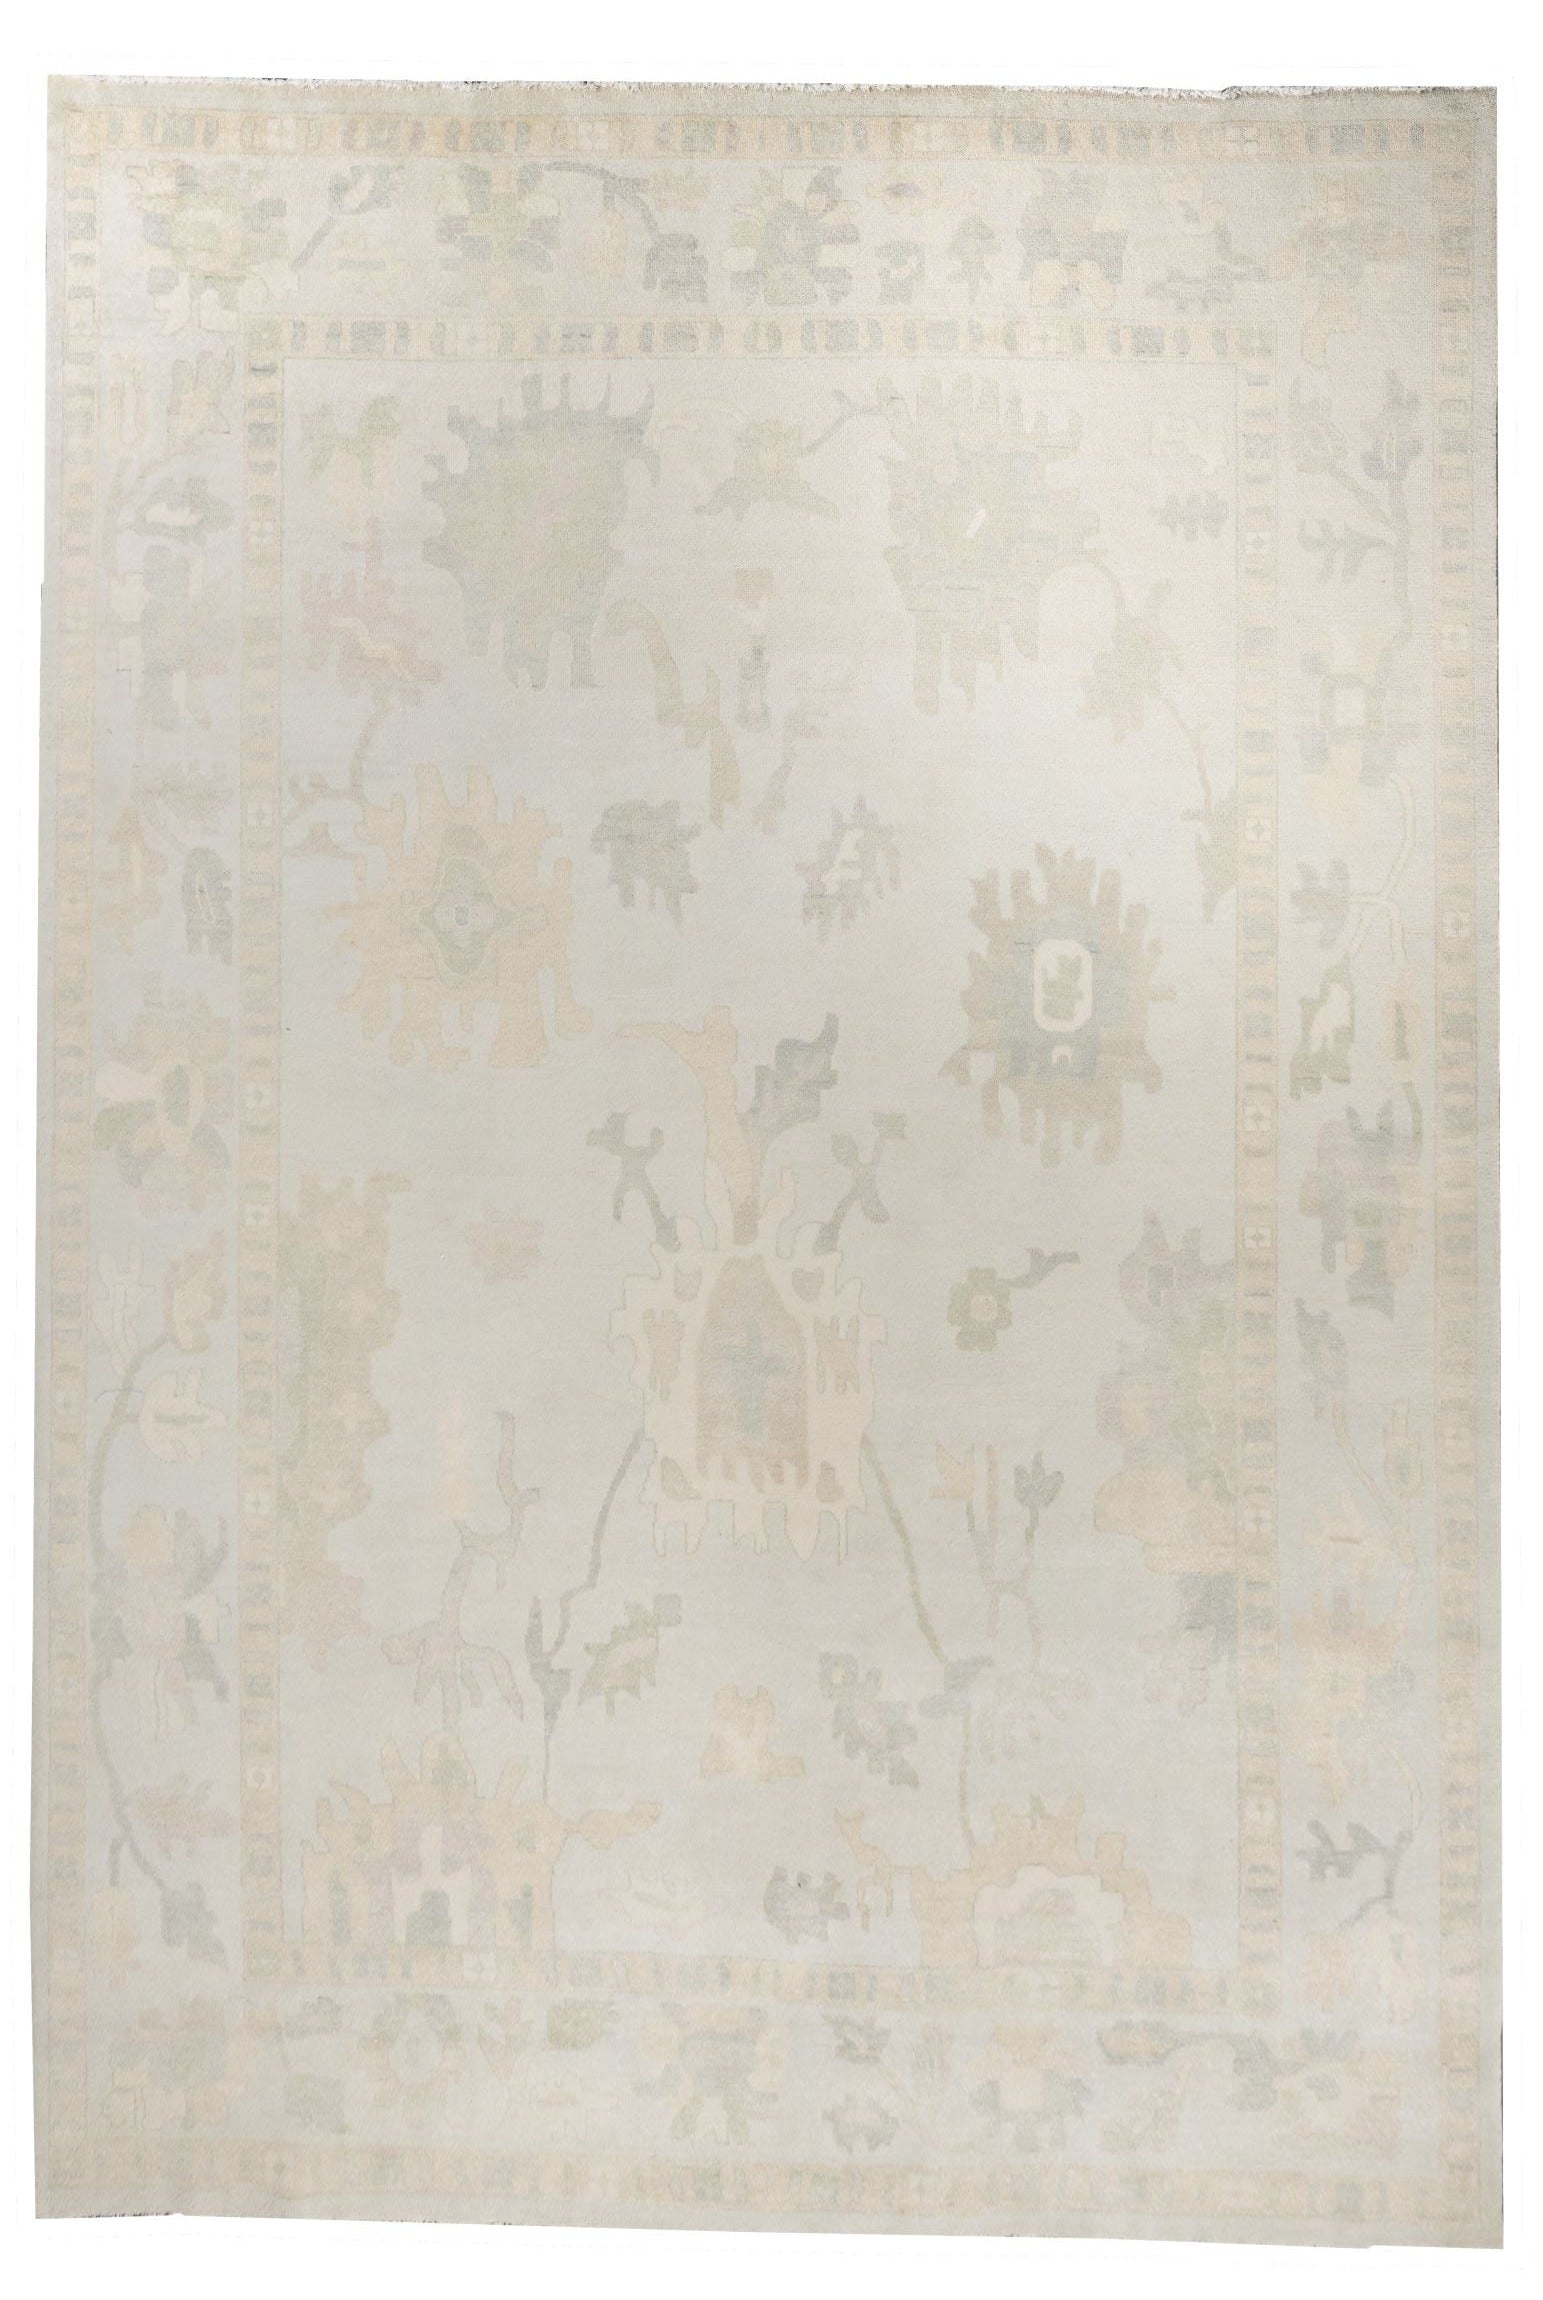 Neutral toned and hand-knotted Oushak style rug made of 100% New Zealand wool. This rug is comprised of tan, taupe, beige, gray, ivory, and blue colors.